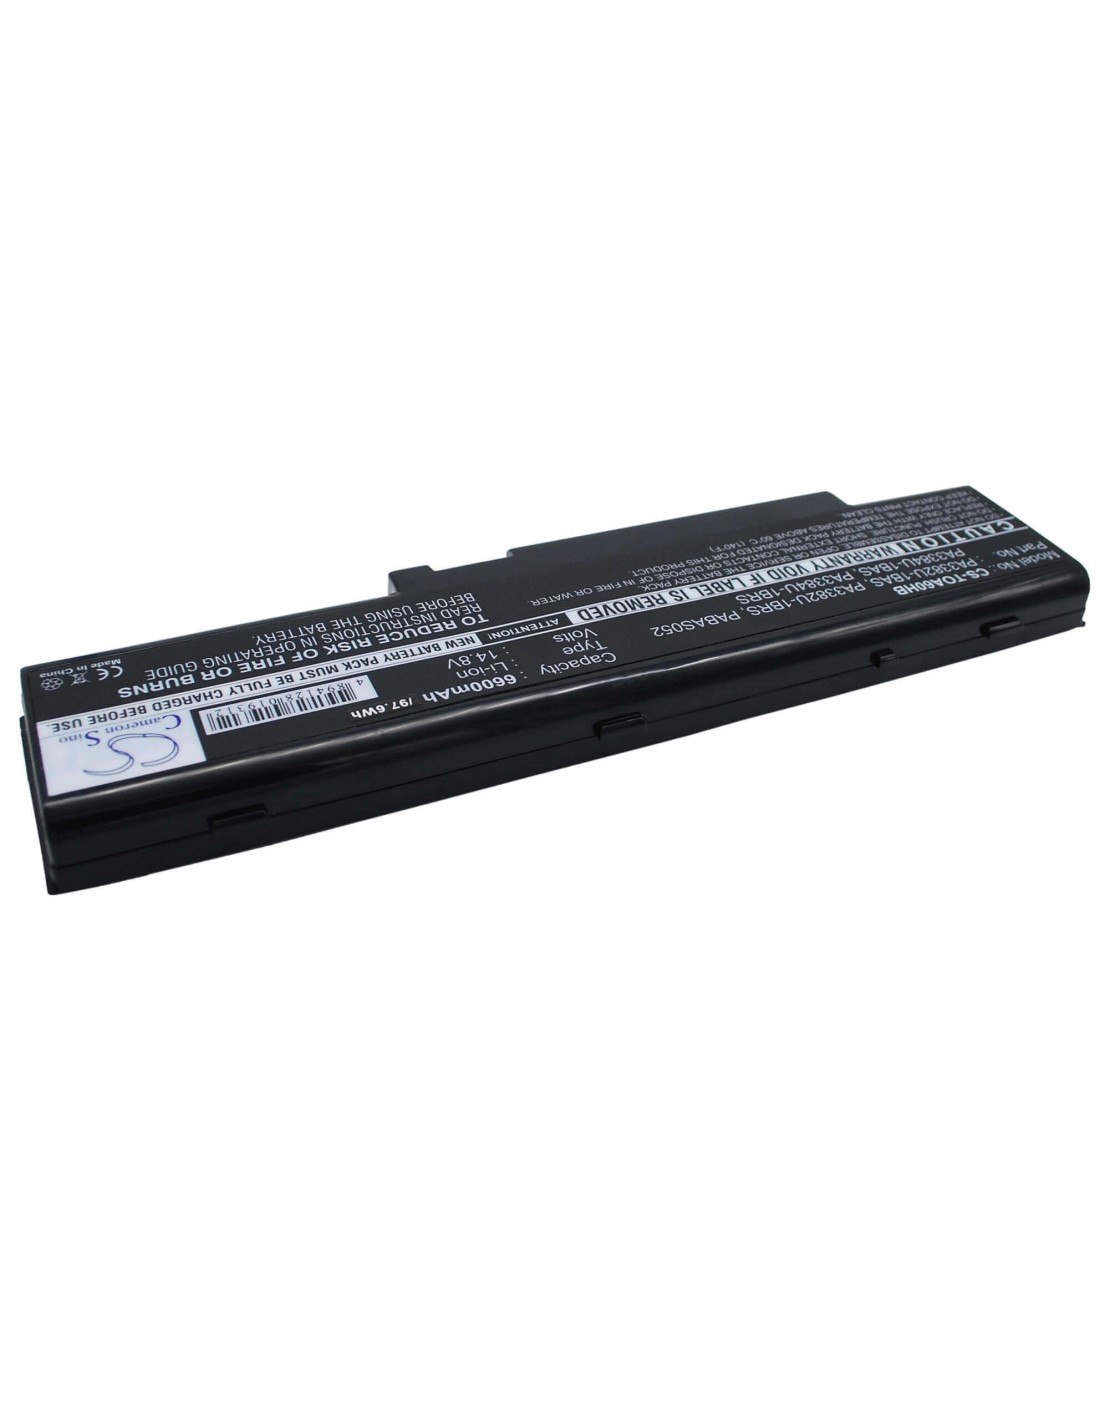 Black Battery for Toshiba Satellite A60-s1591, Satellite A60-s156, Satellite A60-743 14.8V, 6600mAh - 97.68Wh